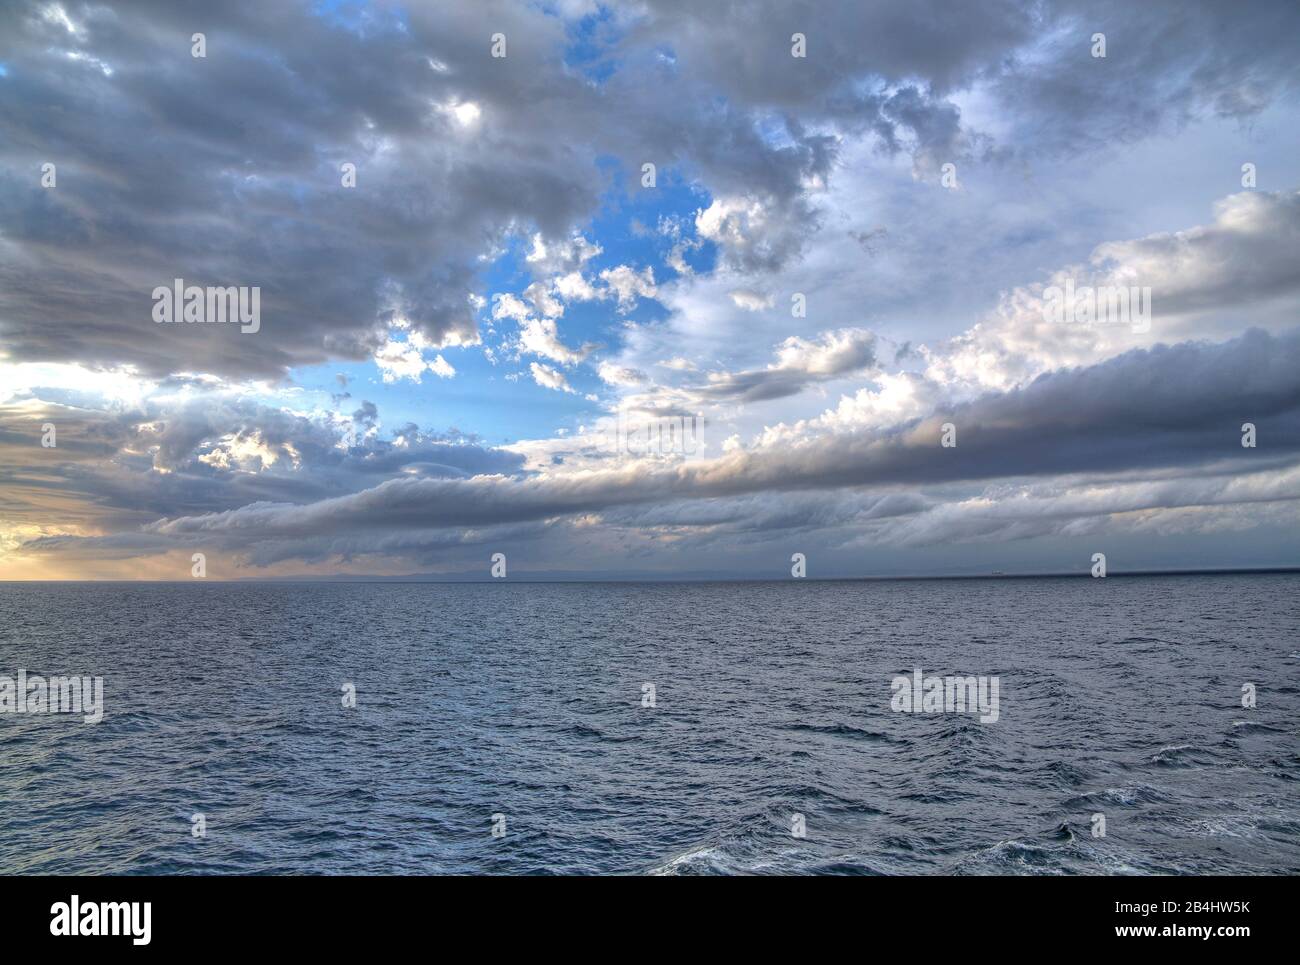 Sea with dramatic cloud atmosphere Stock Photo